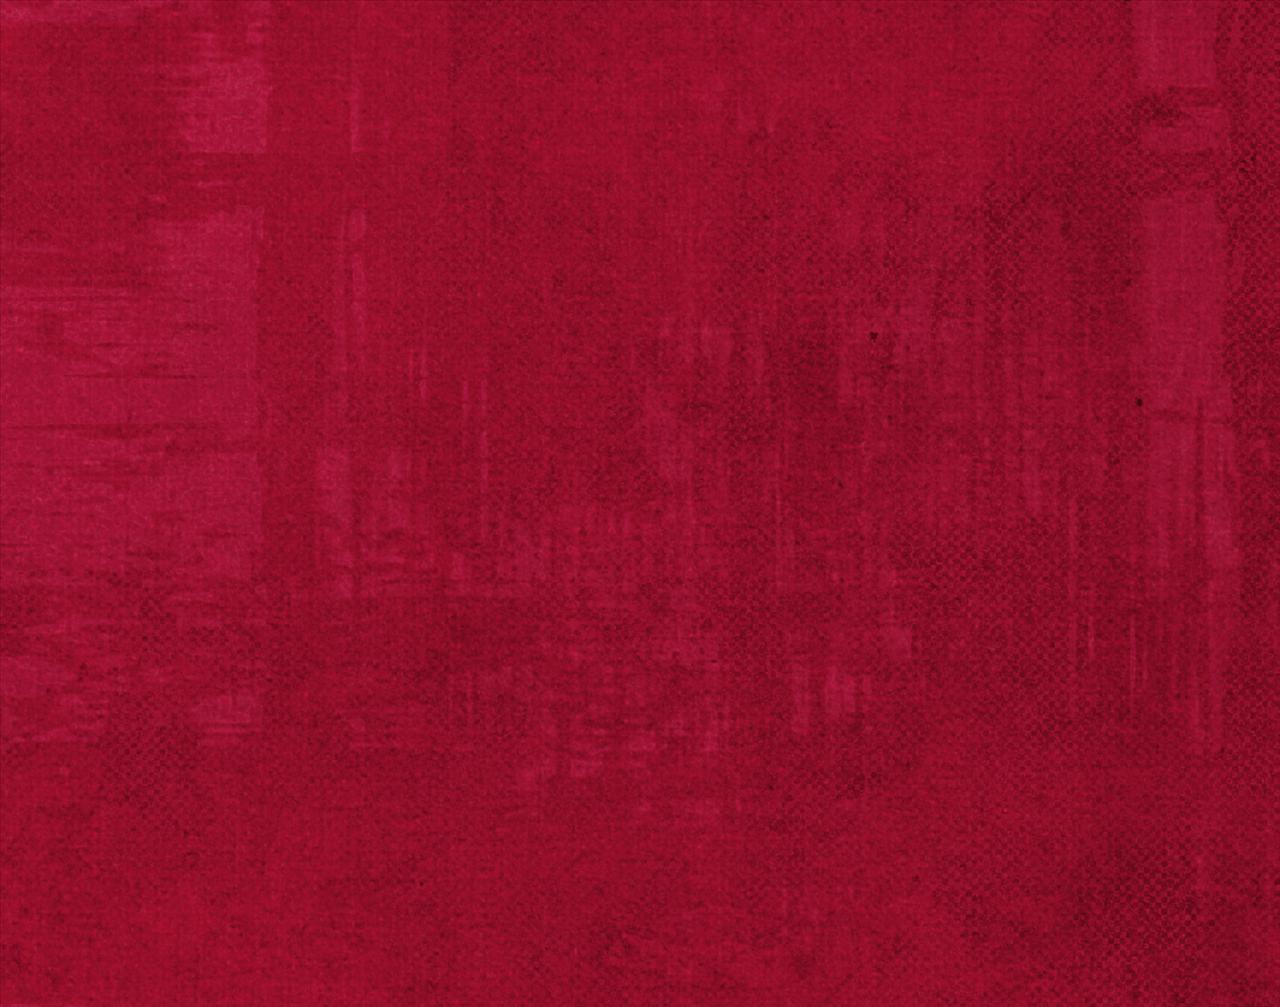 Deep Red Love Backgrounds